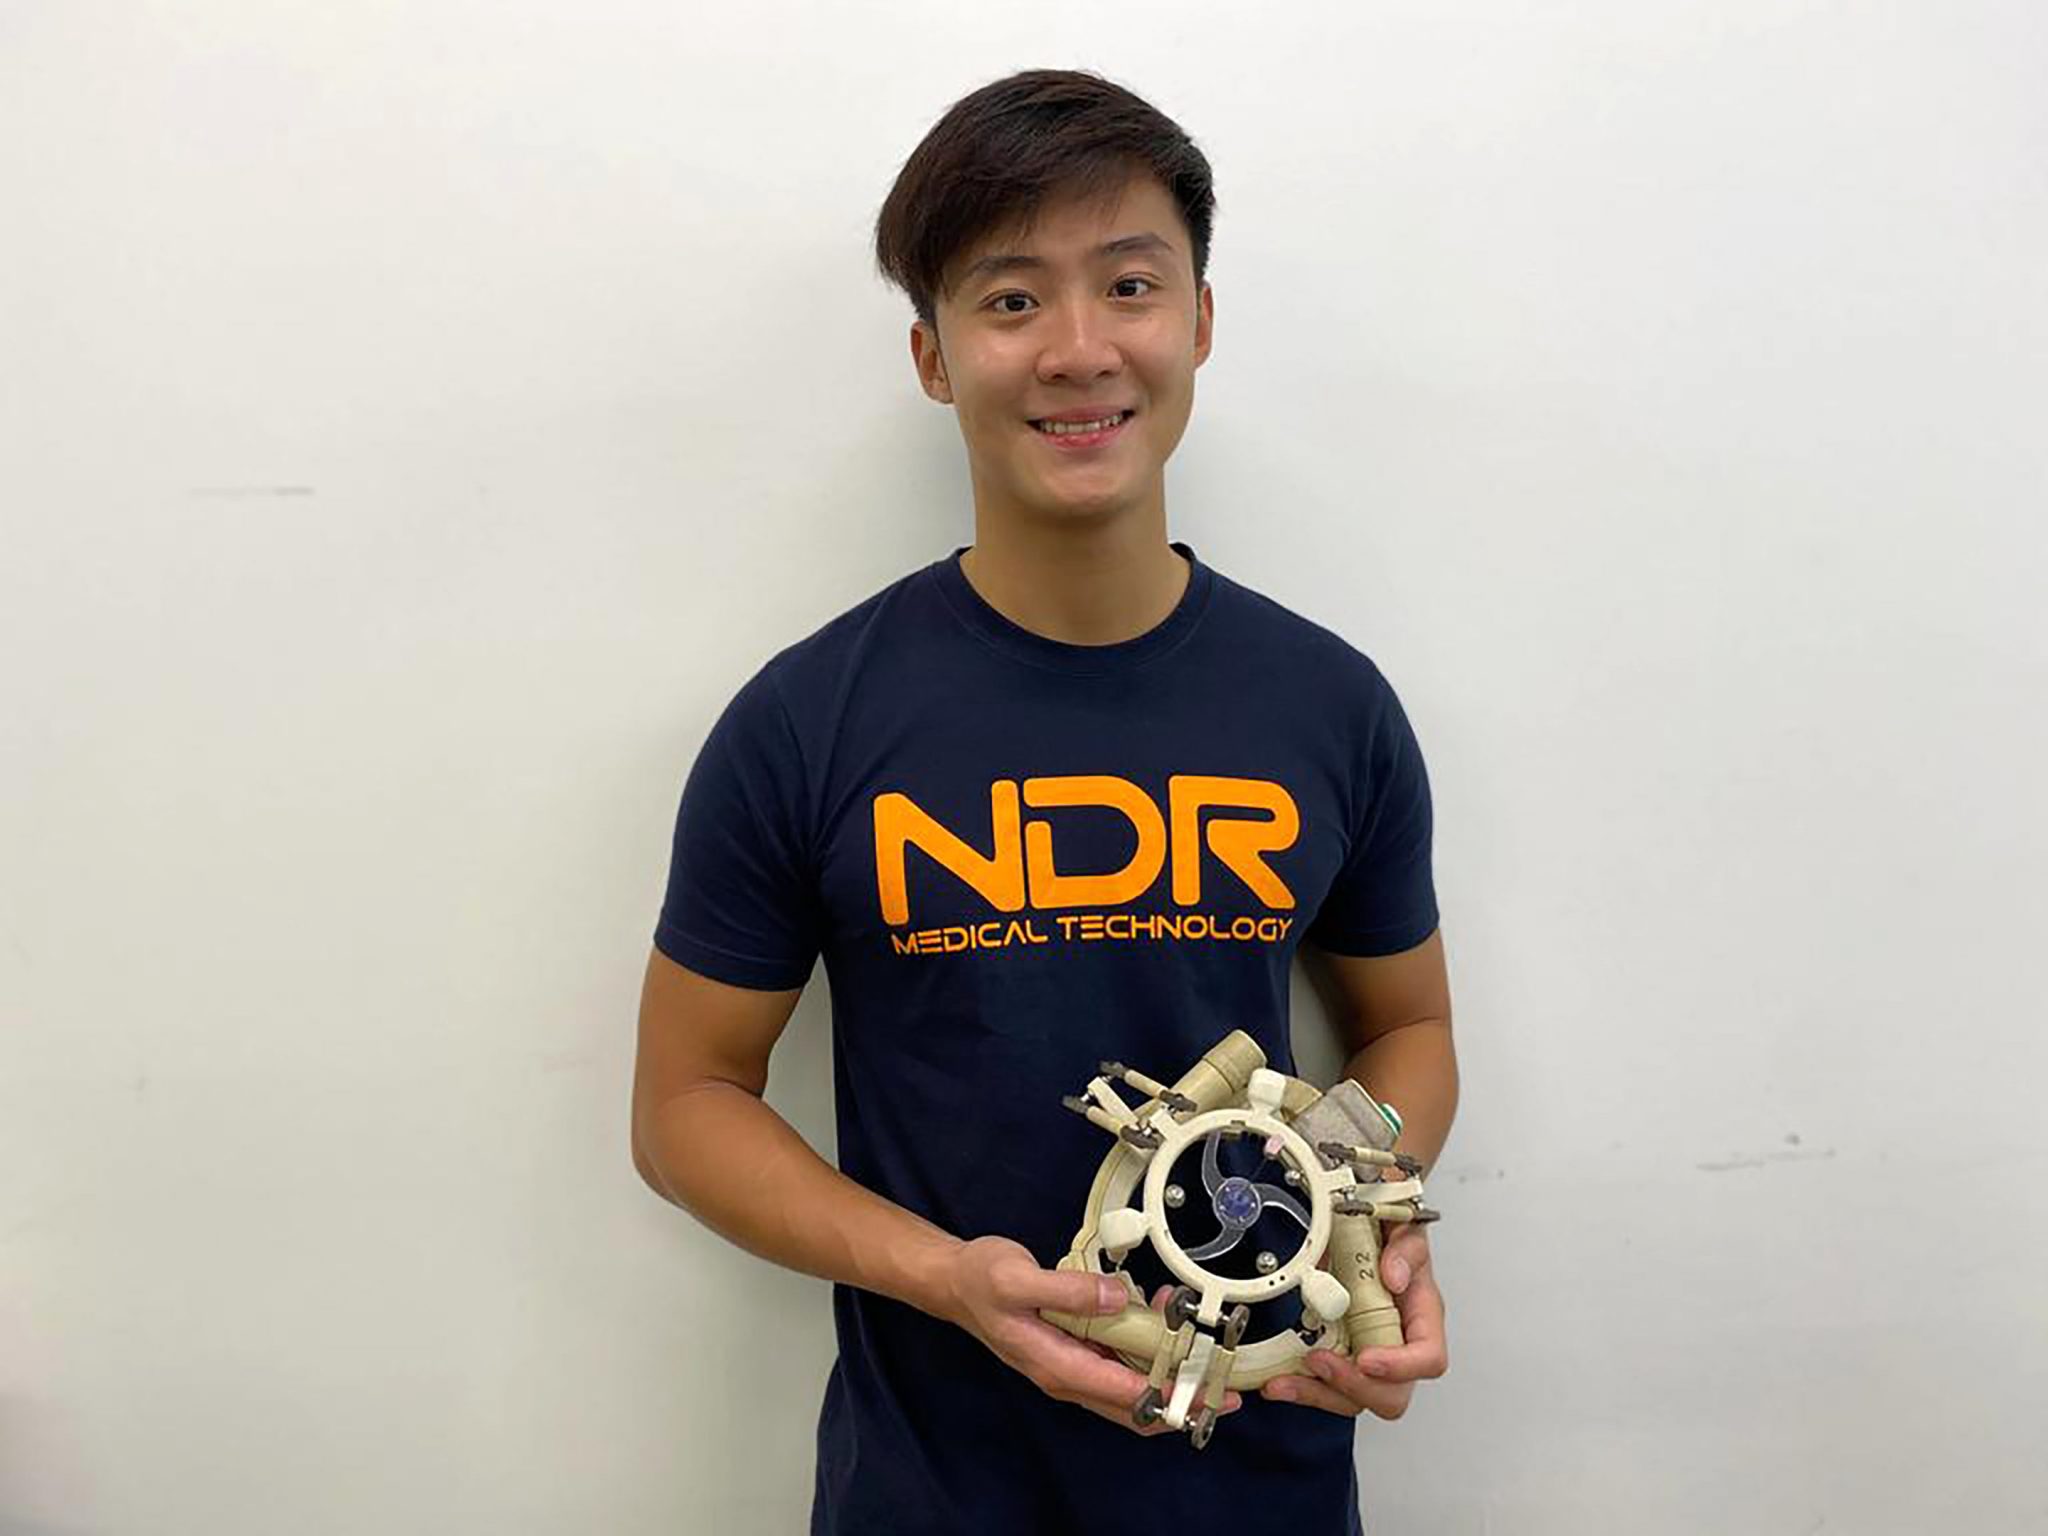 After consultations with our resident career advisor, recent NUS Mechanical Engineering graduate Darren Cheong is now gainfully employed at start-up NDR Medical Technology